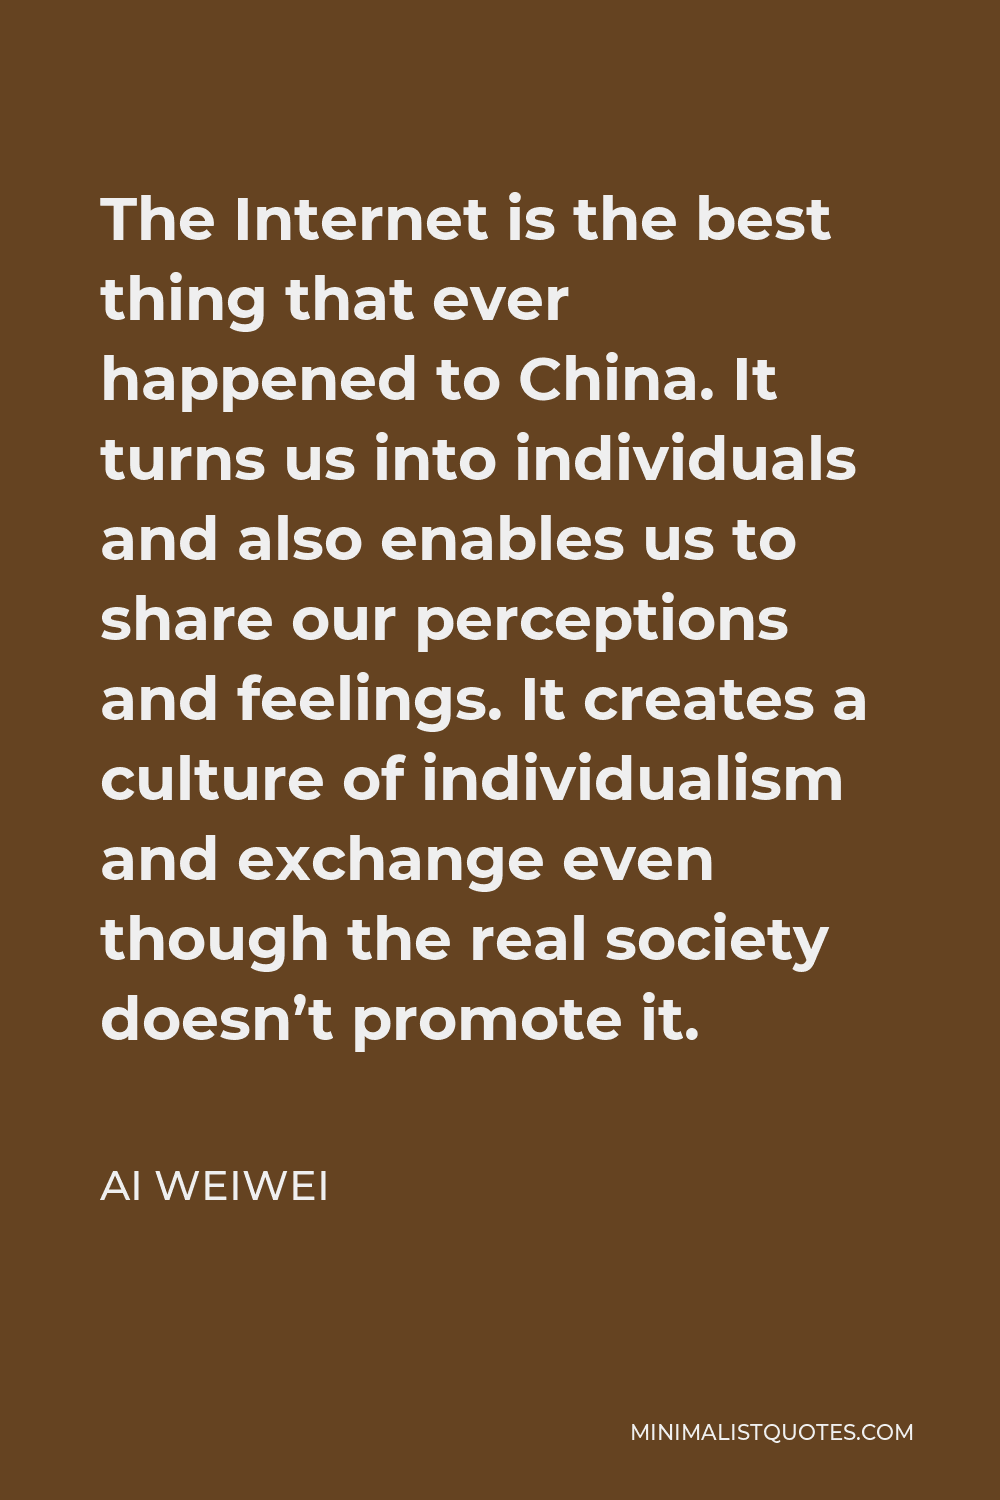 Ai Weiwei Quote - The Internet is the best thing that ever happened to China. It turns us into individuals and also enables us to share our perceptions and feelings. It creates a culture of individualism and exchange even though the real society doesn’t promote it.